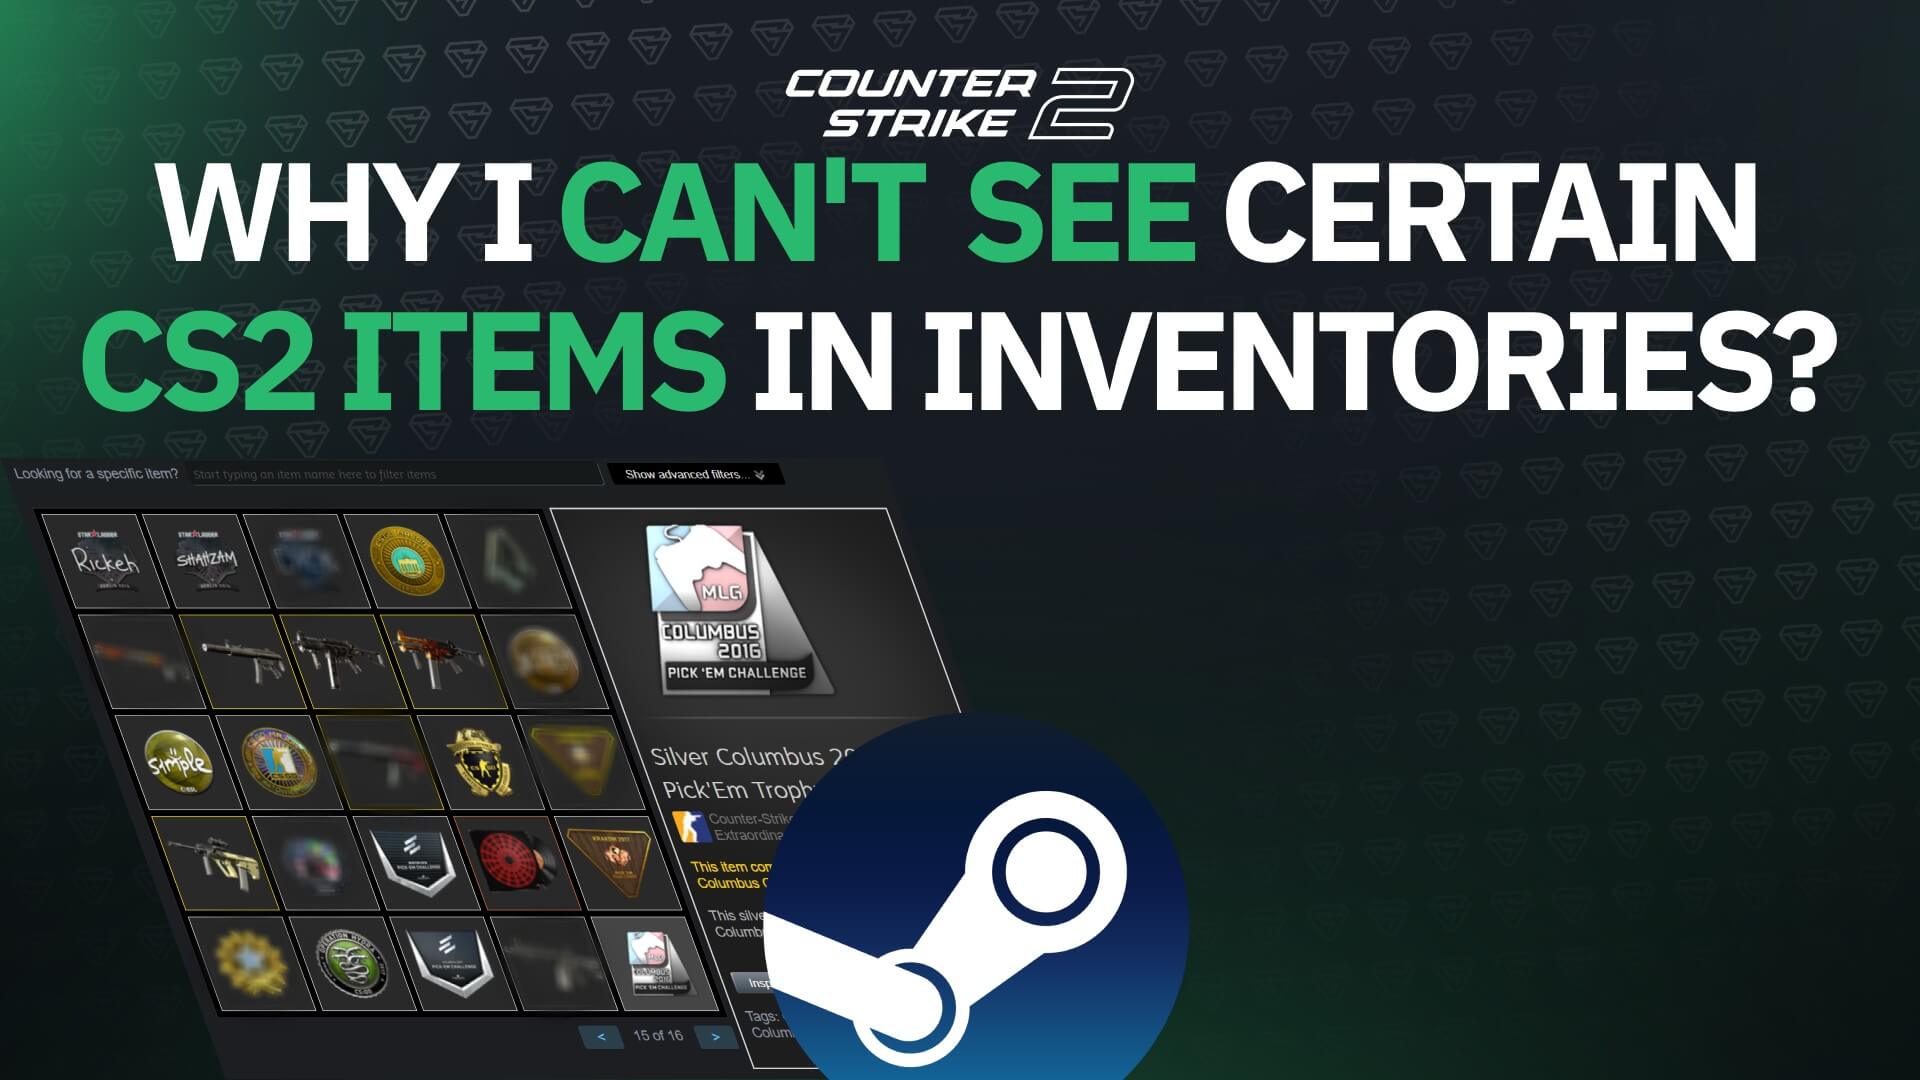 Why Can't I See Certain CS2 Items in Inventories?